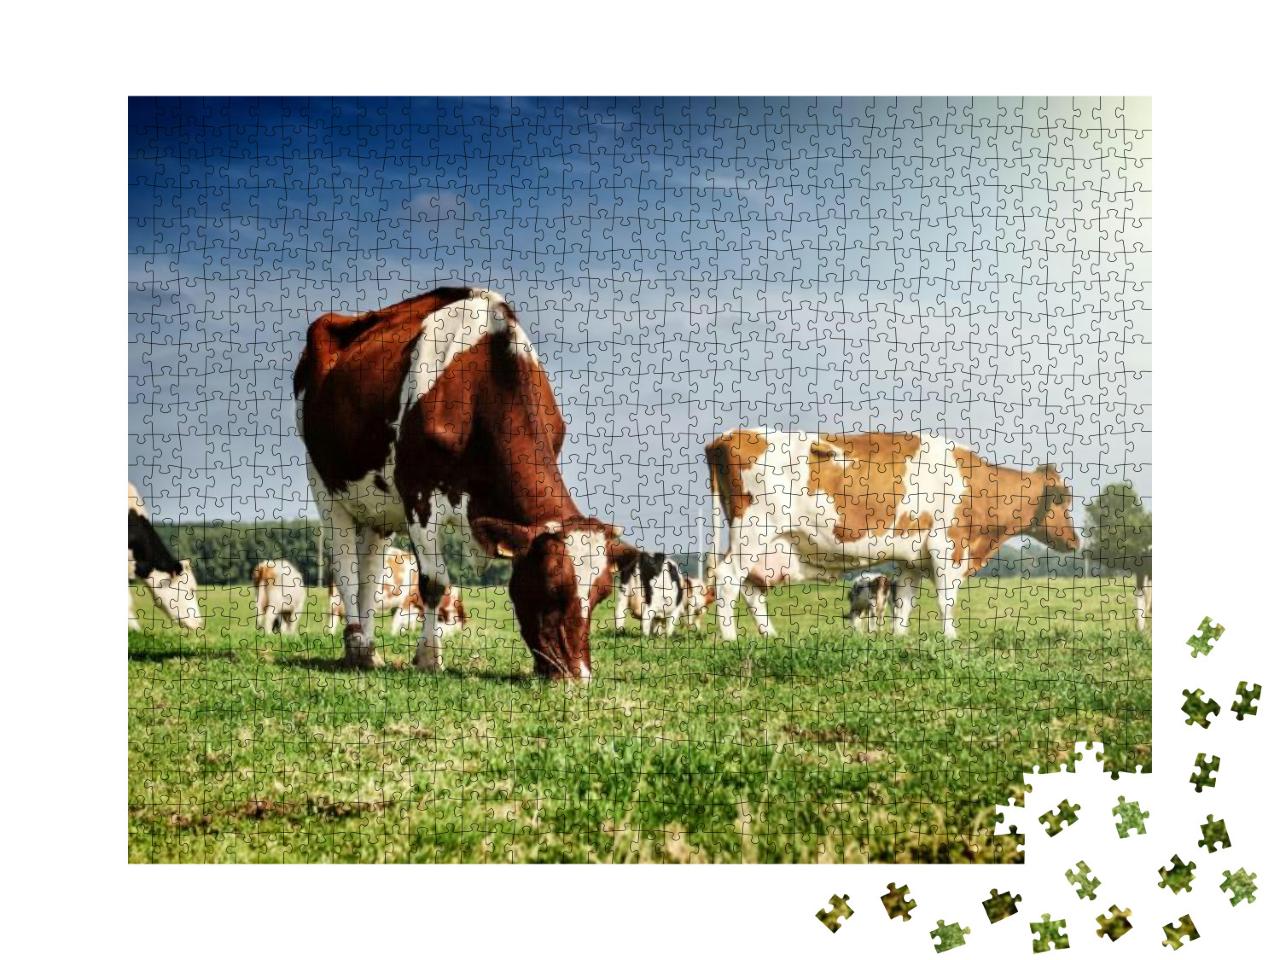 Herd of Cows At Summer Green Field... Jigsaw Puzzle with 1000 pieces